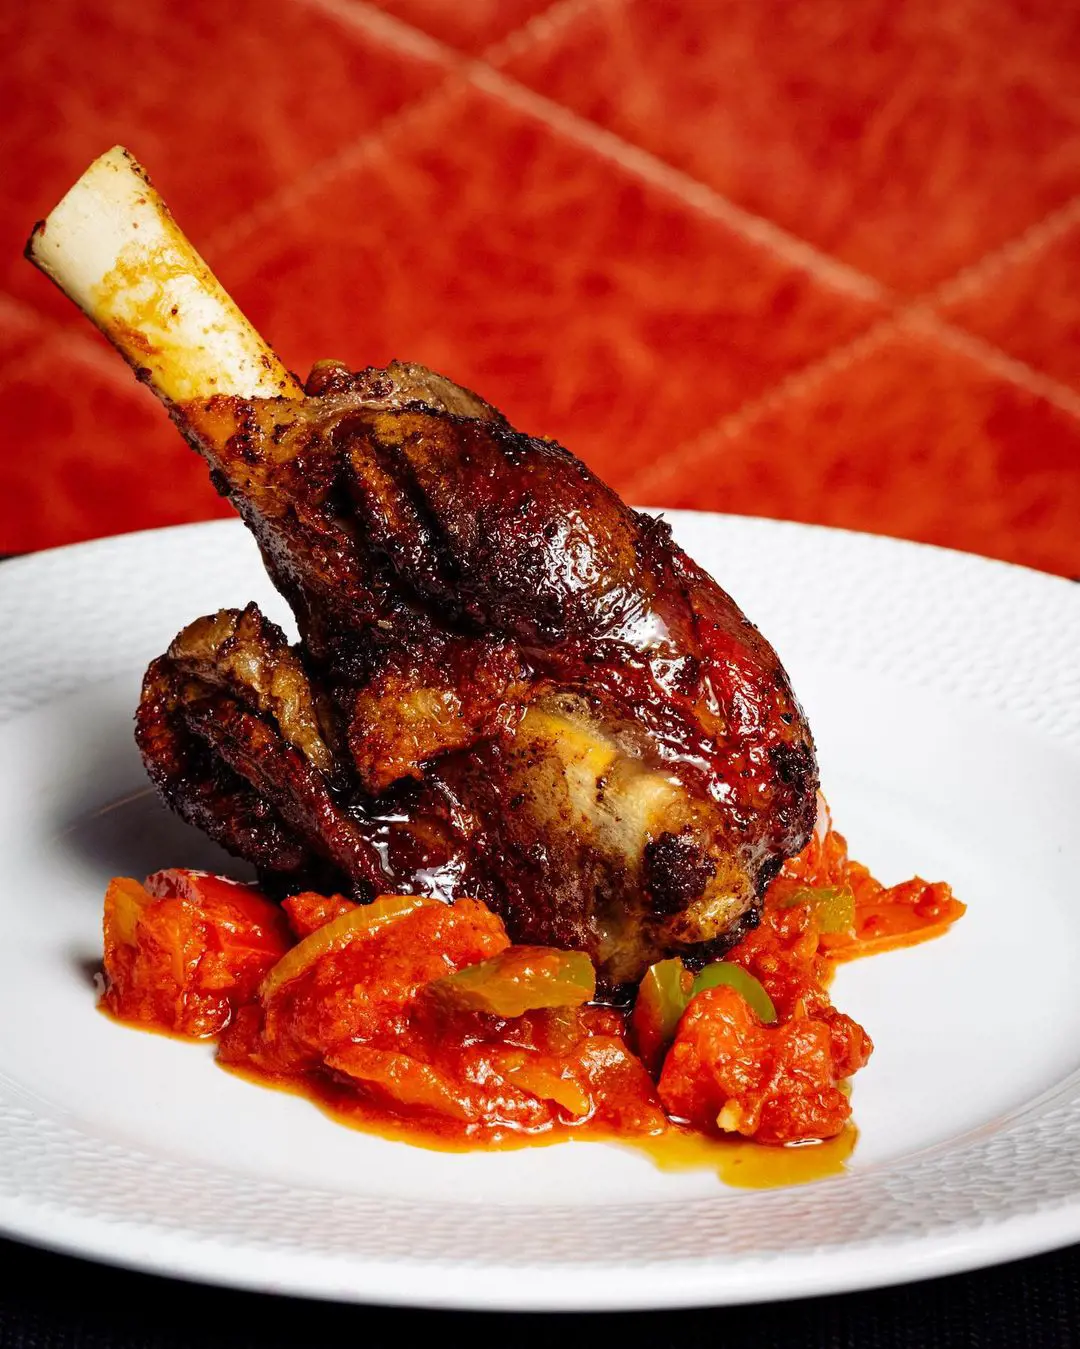 Green harissa slow cooked lam shank with spice ratatouille